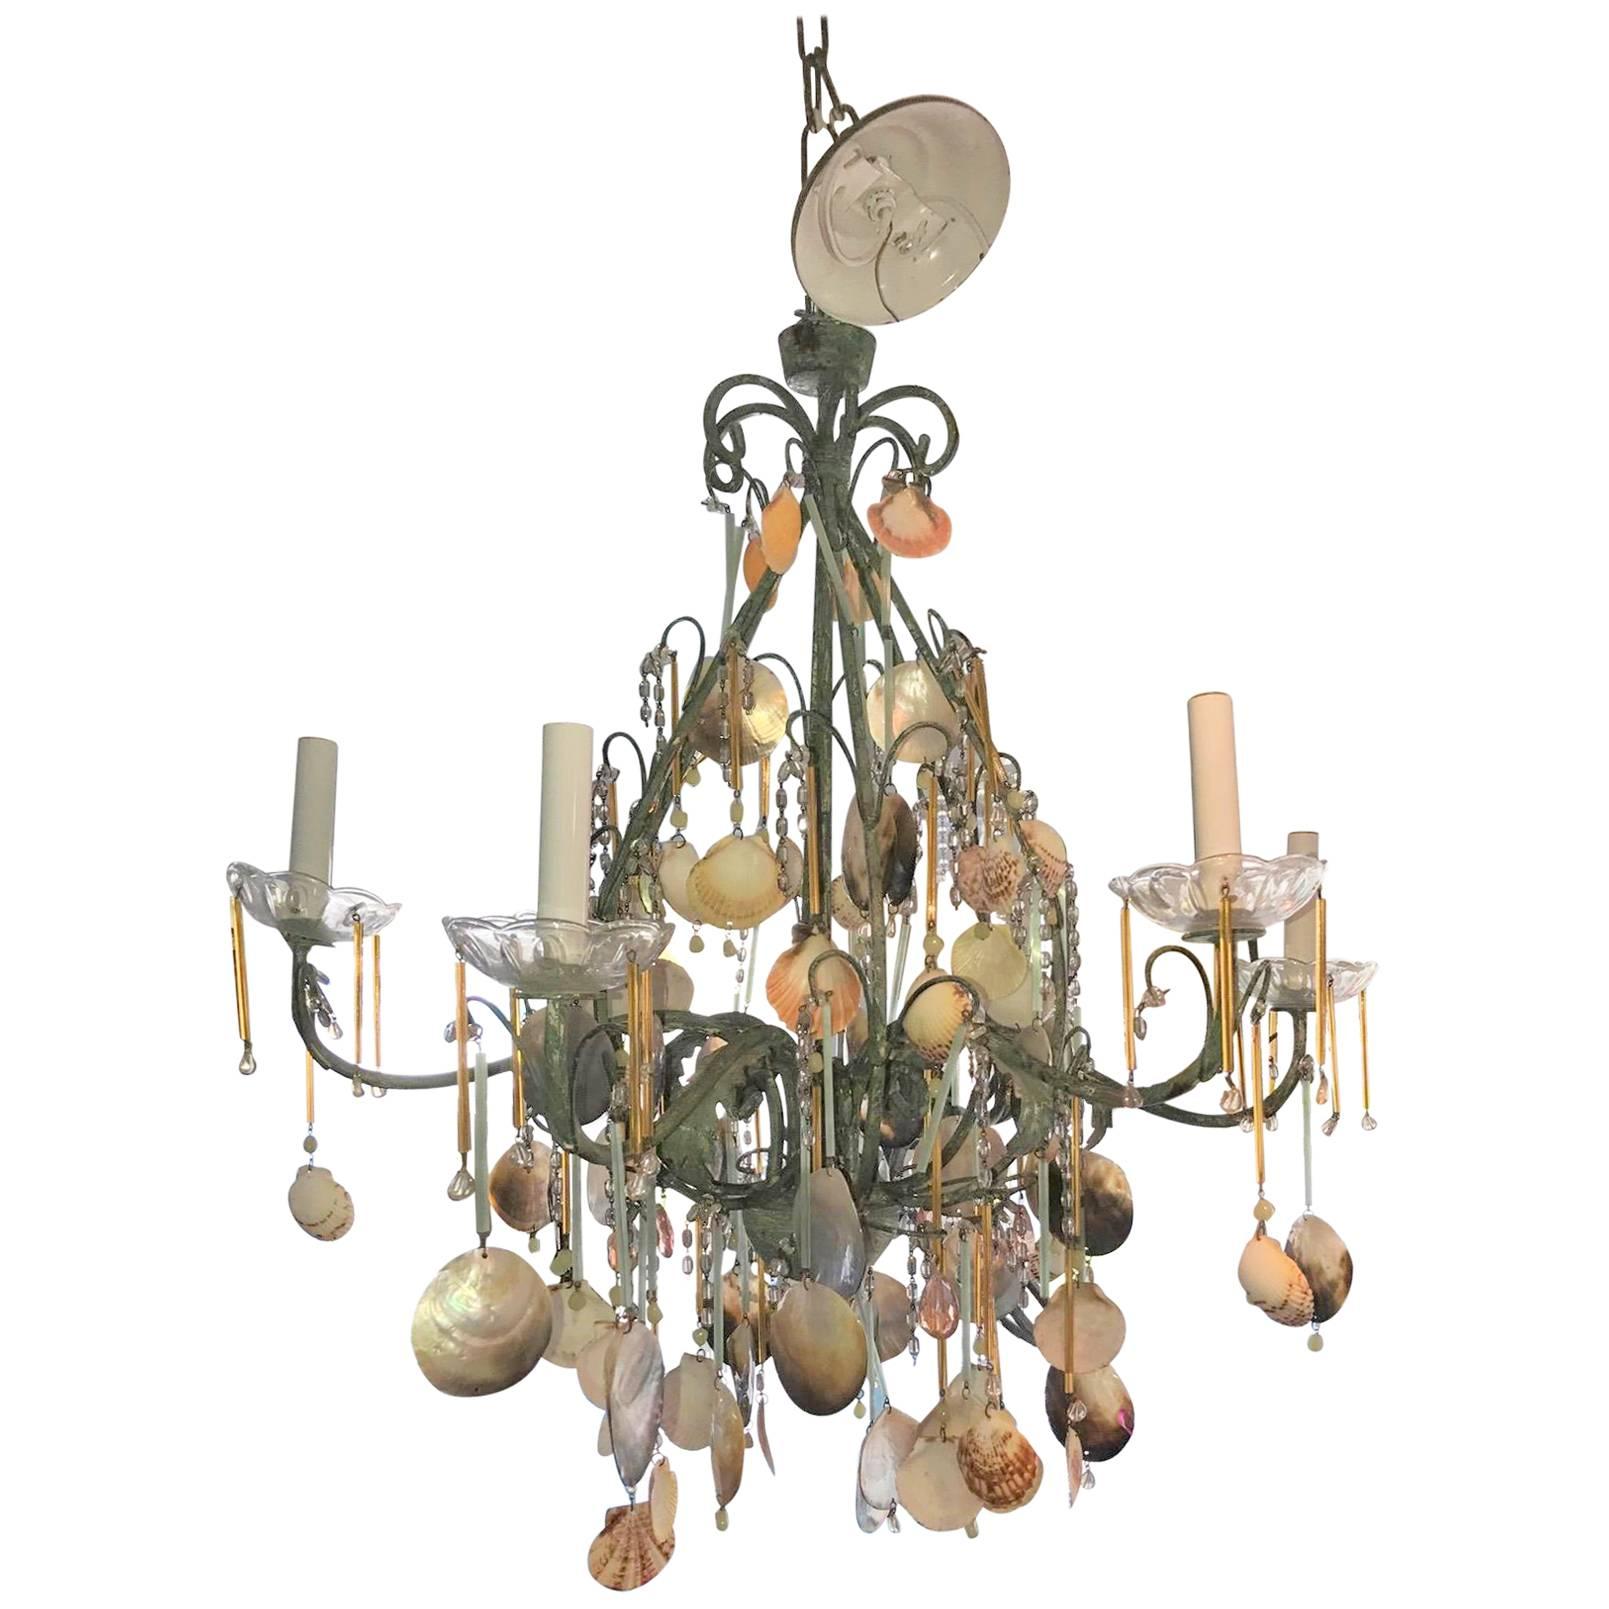  Reduced Sale!  SALE Coastal By The Sea Shell Chandelier Violet Amber Crystals  